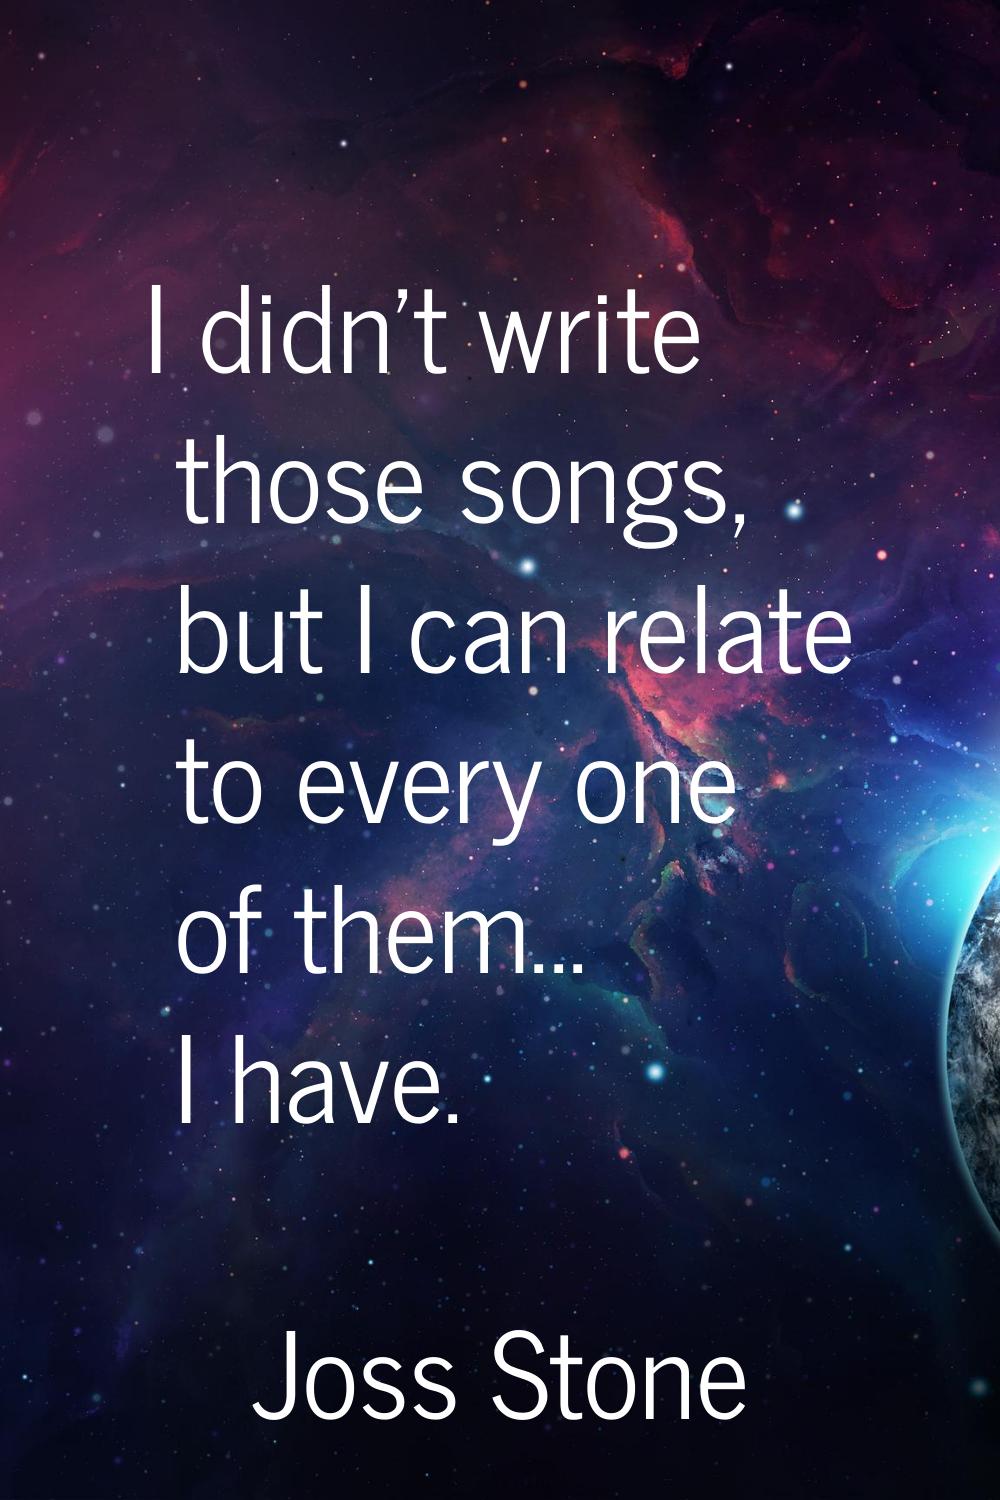 I didn't write those songs, but I can relate to every one of them... I have.